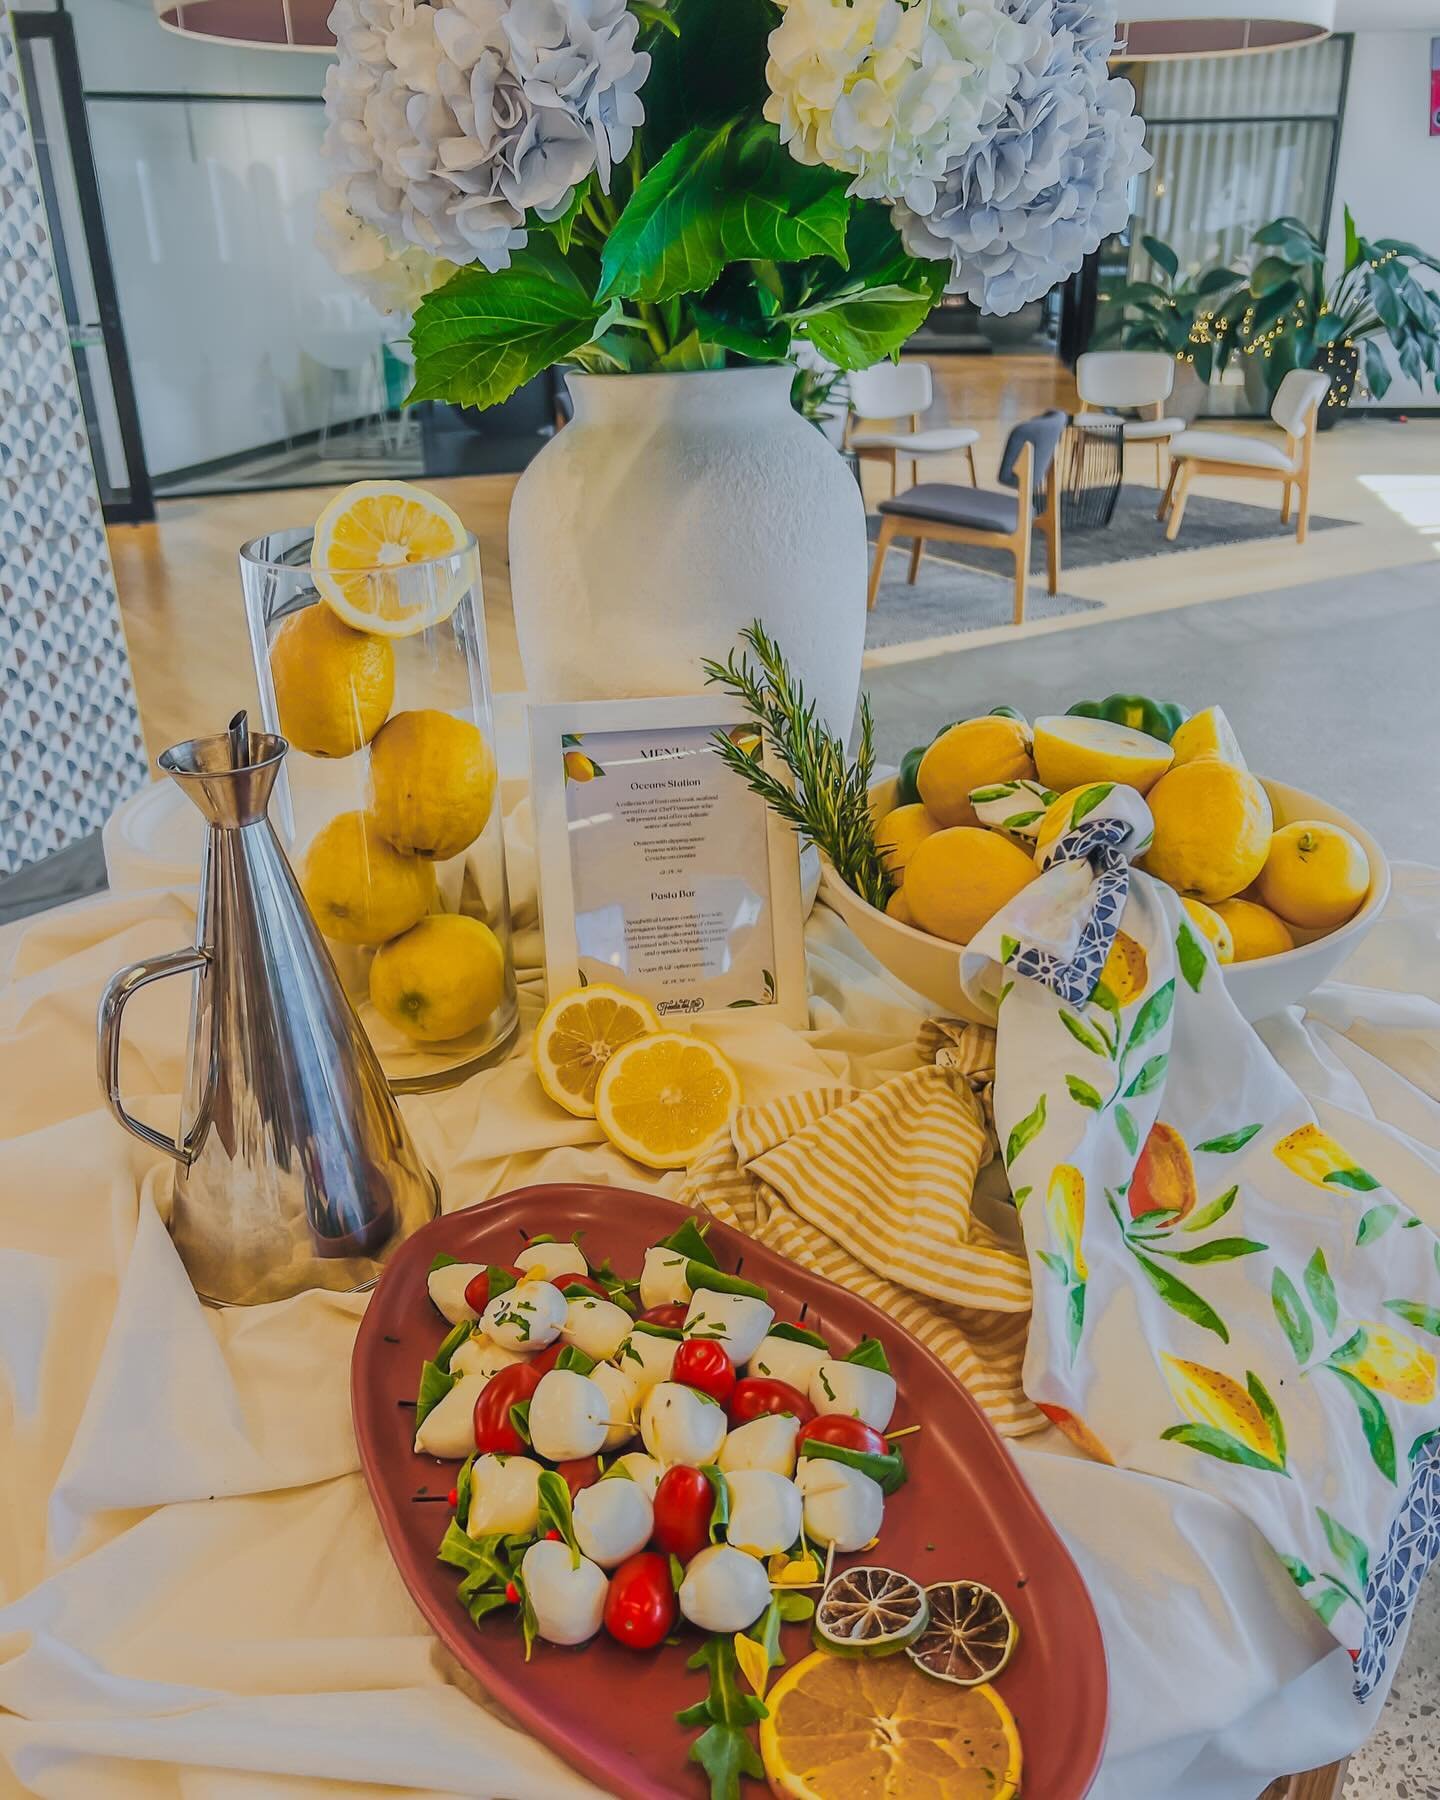 Starting with delicious canapes before the main event. 🍋🍅🍋⁣⁣⁣
⁣⁣⁣
The main event: Oceans Station and Pasta Bar.⁣⁣⁣
⁣⁣⁣
𝘝𝘪𝘴𝘪𝘵 𝘵𝘩𝘦 𝘭𝘪𝘯𝘬 𝘣𝘦𝘭𝘰𝘸 𝘵𝘰 𝘥𝘪𝘴𝘤𝘰𝘷𝘦𝘳 𝘮𝘰𝘳𝘦.⁣⁣⁣
⁣⁣⁣
https://www.foodiedelmar.com.au/⁣
.⁣⁣⁣⁣⁣⁣
.⁣⁣⁣⁣⁣⁣
.